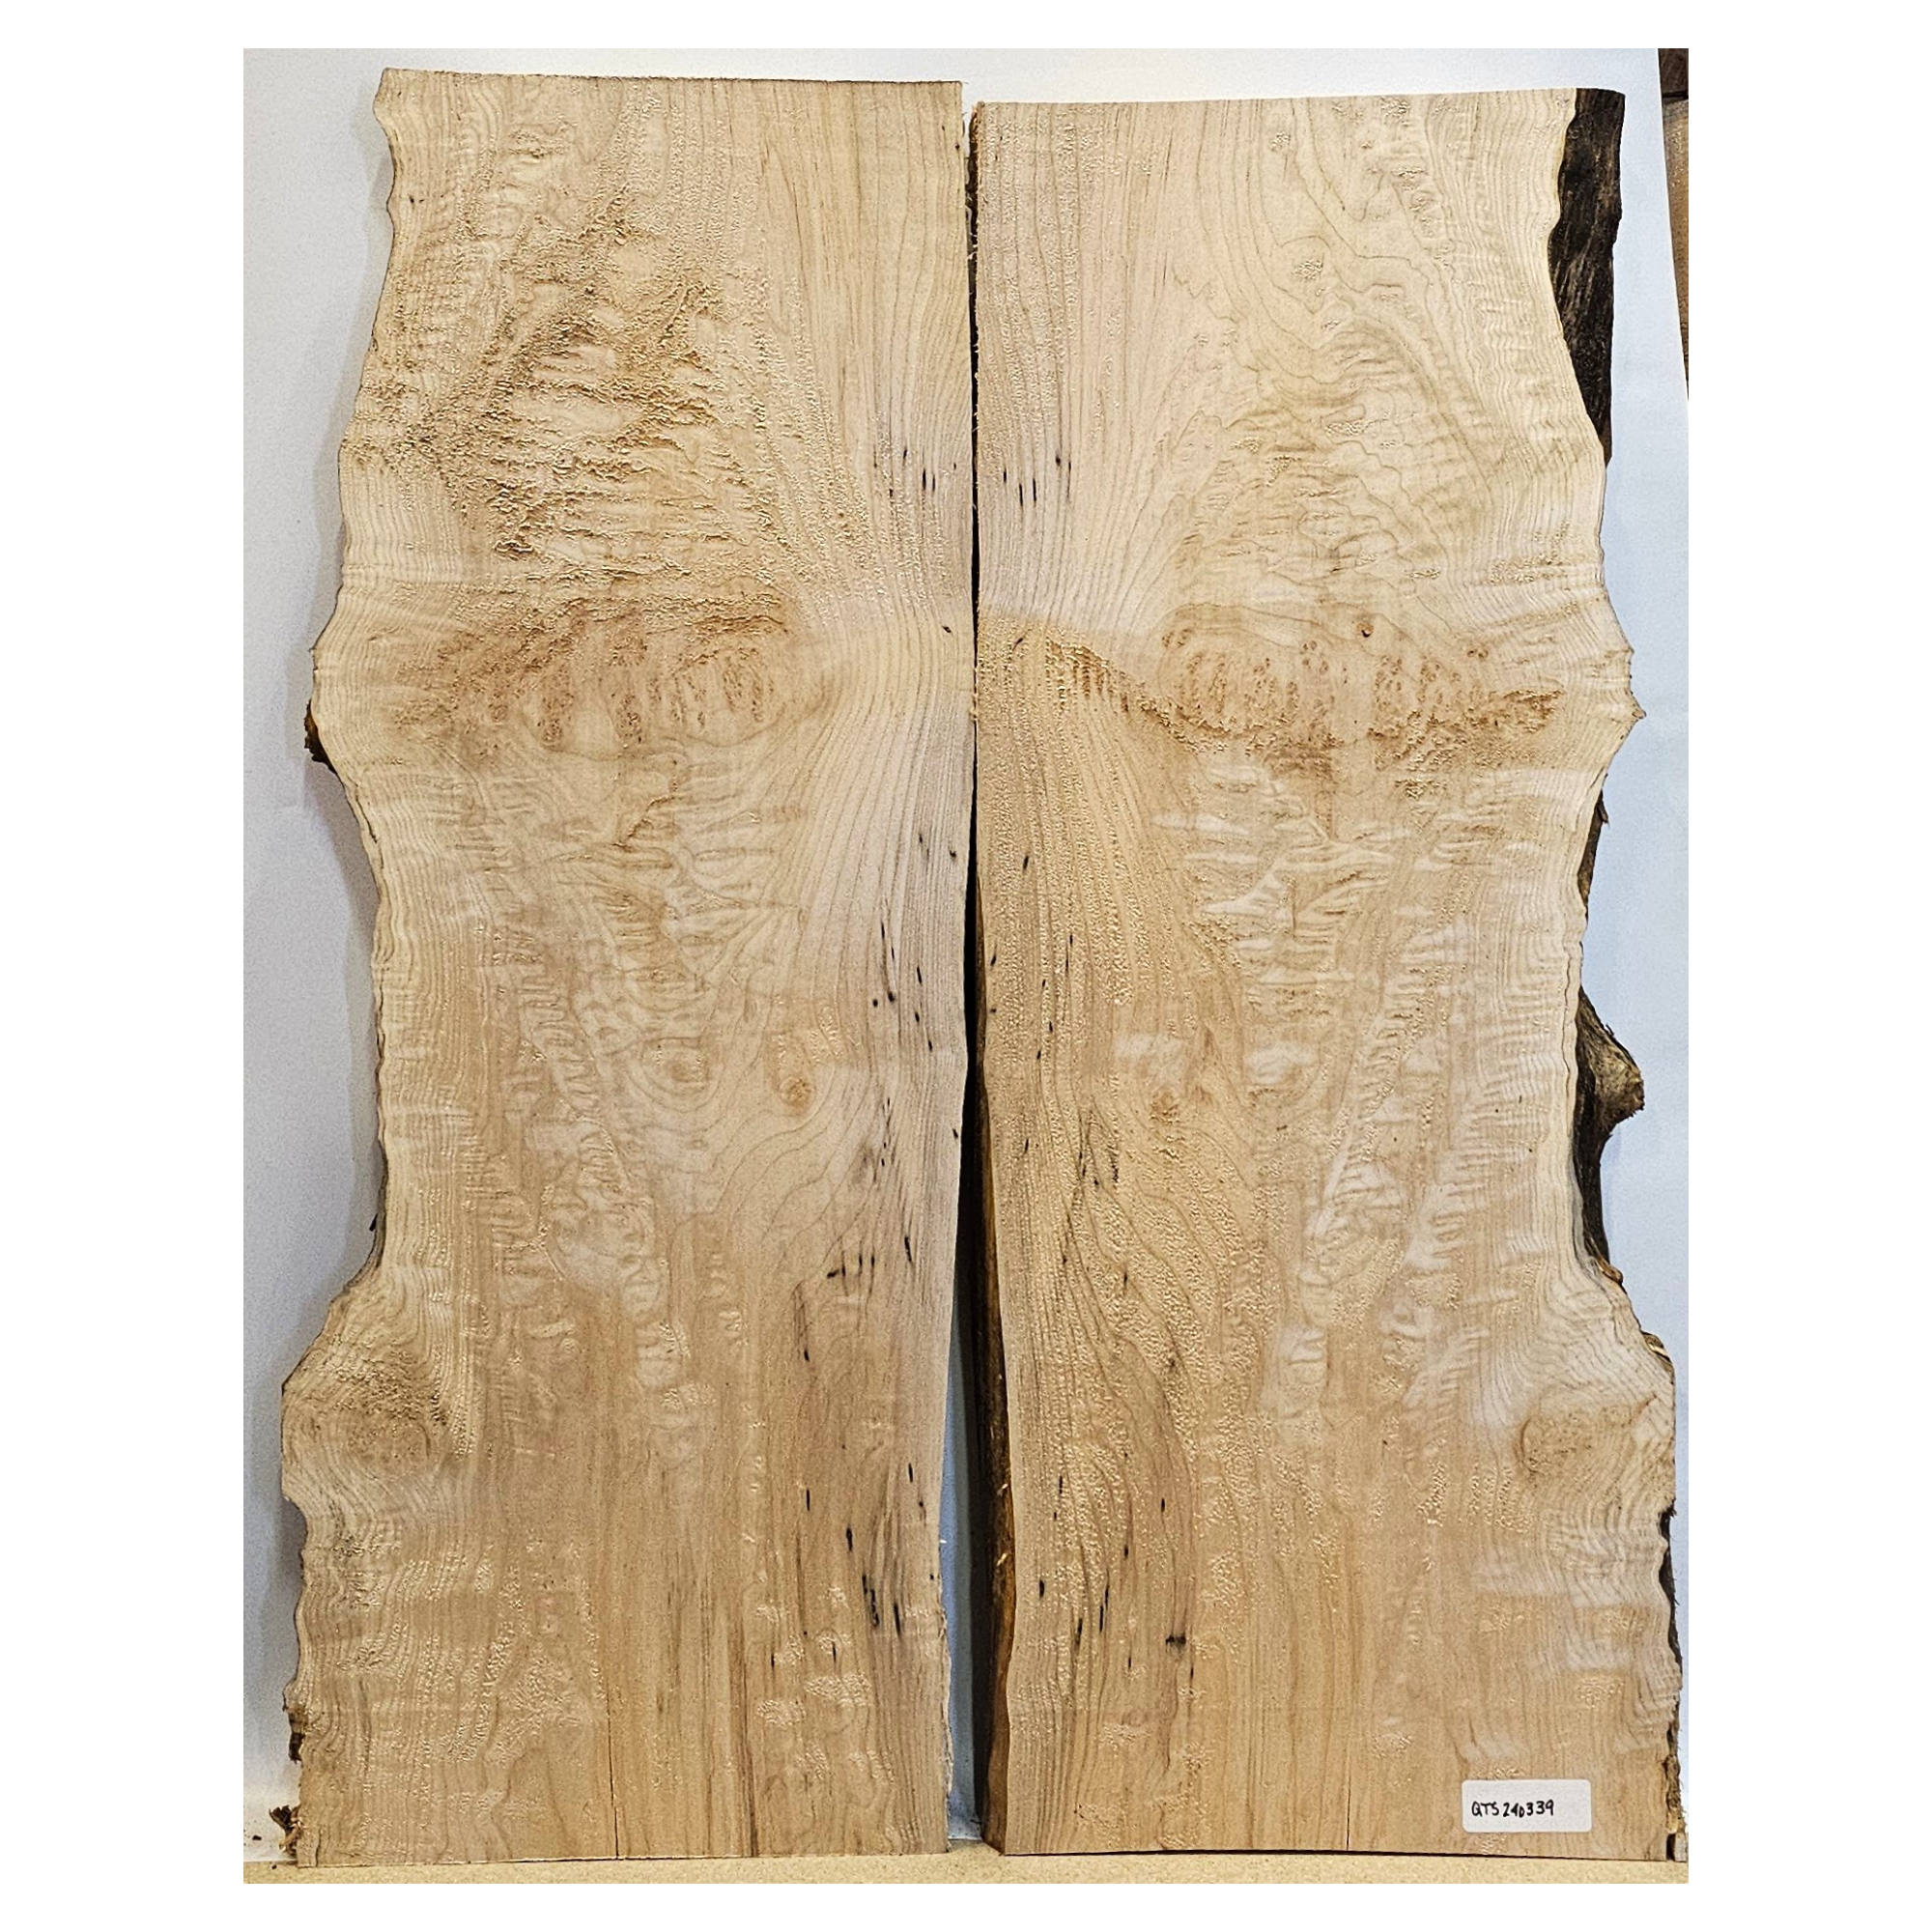 2-piece quilted maple book-matched set with  3A grade figure throughout, scattered burls and live edge.